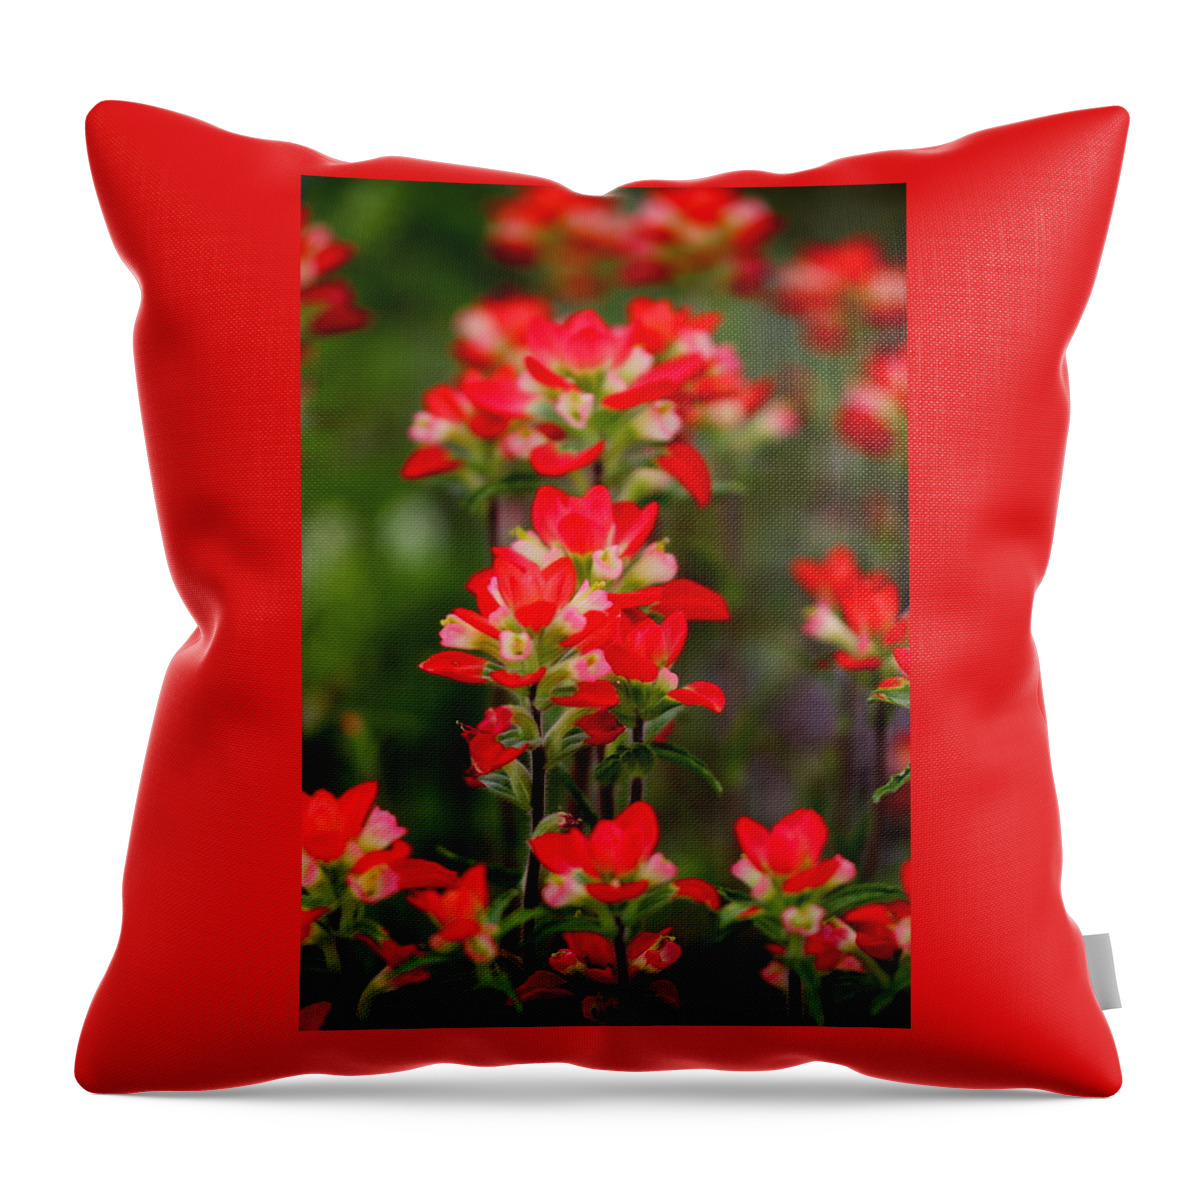 James Smullins Throw Pillow featuring the photograph Red beauties by James Smullins